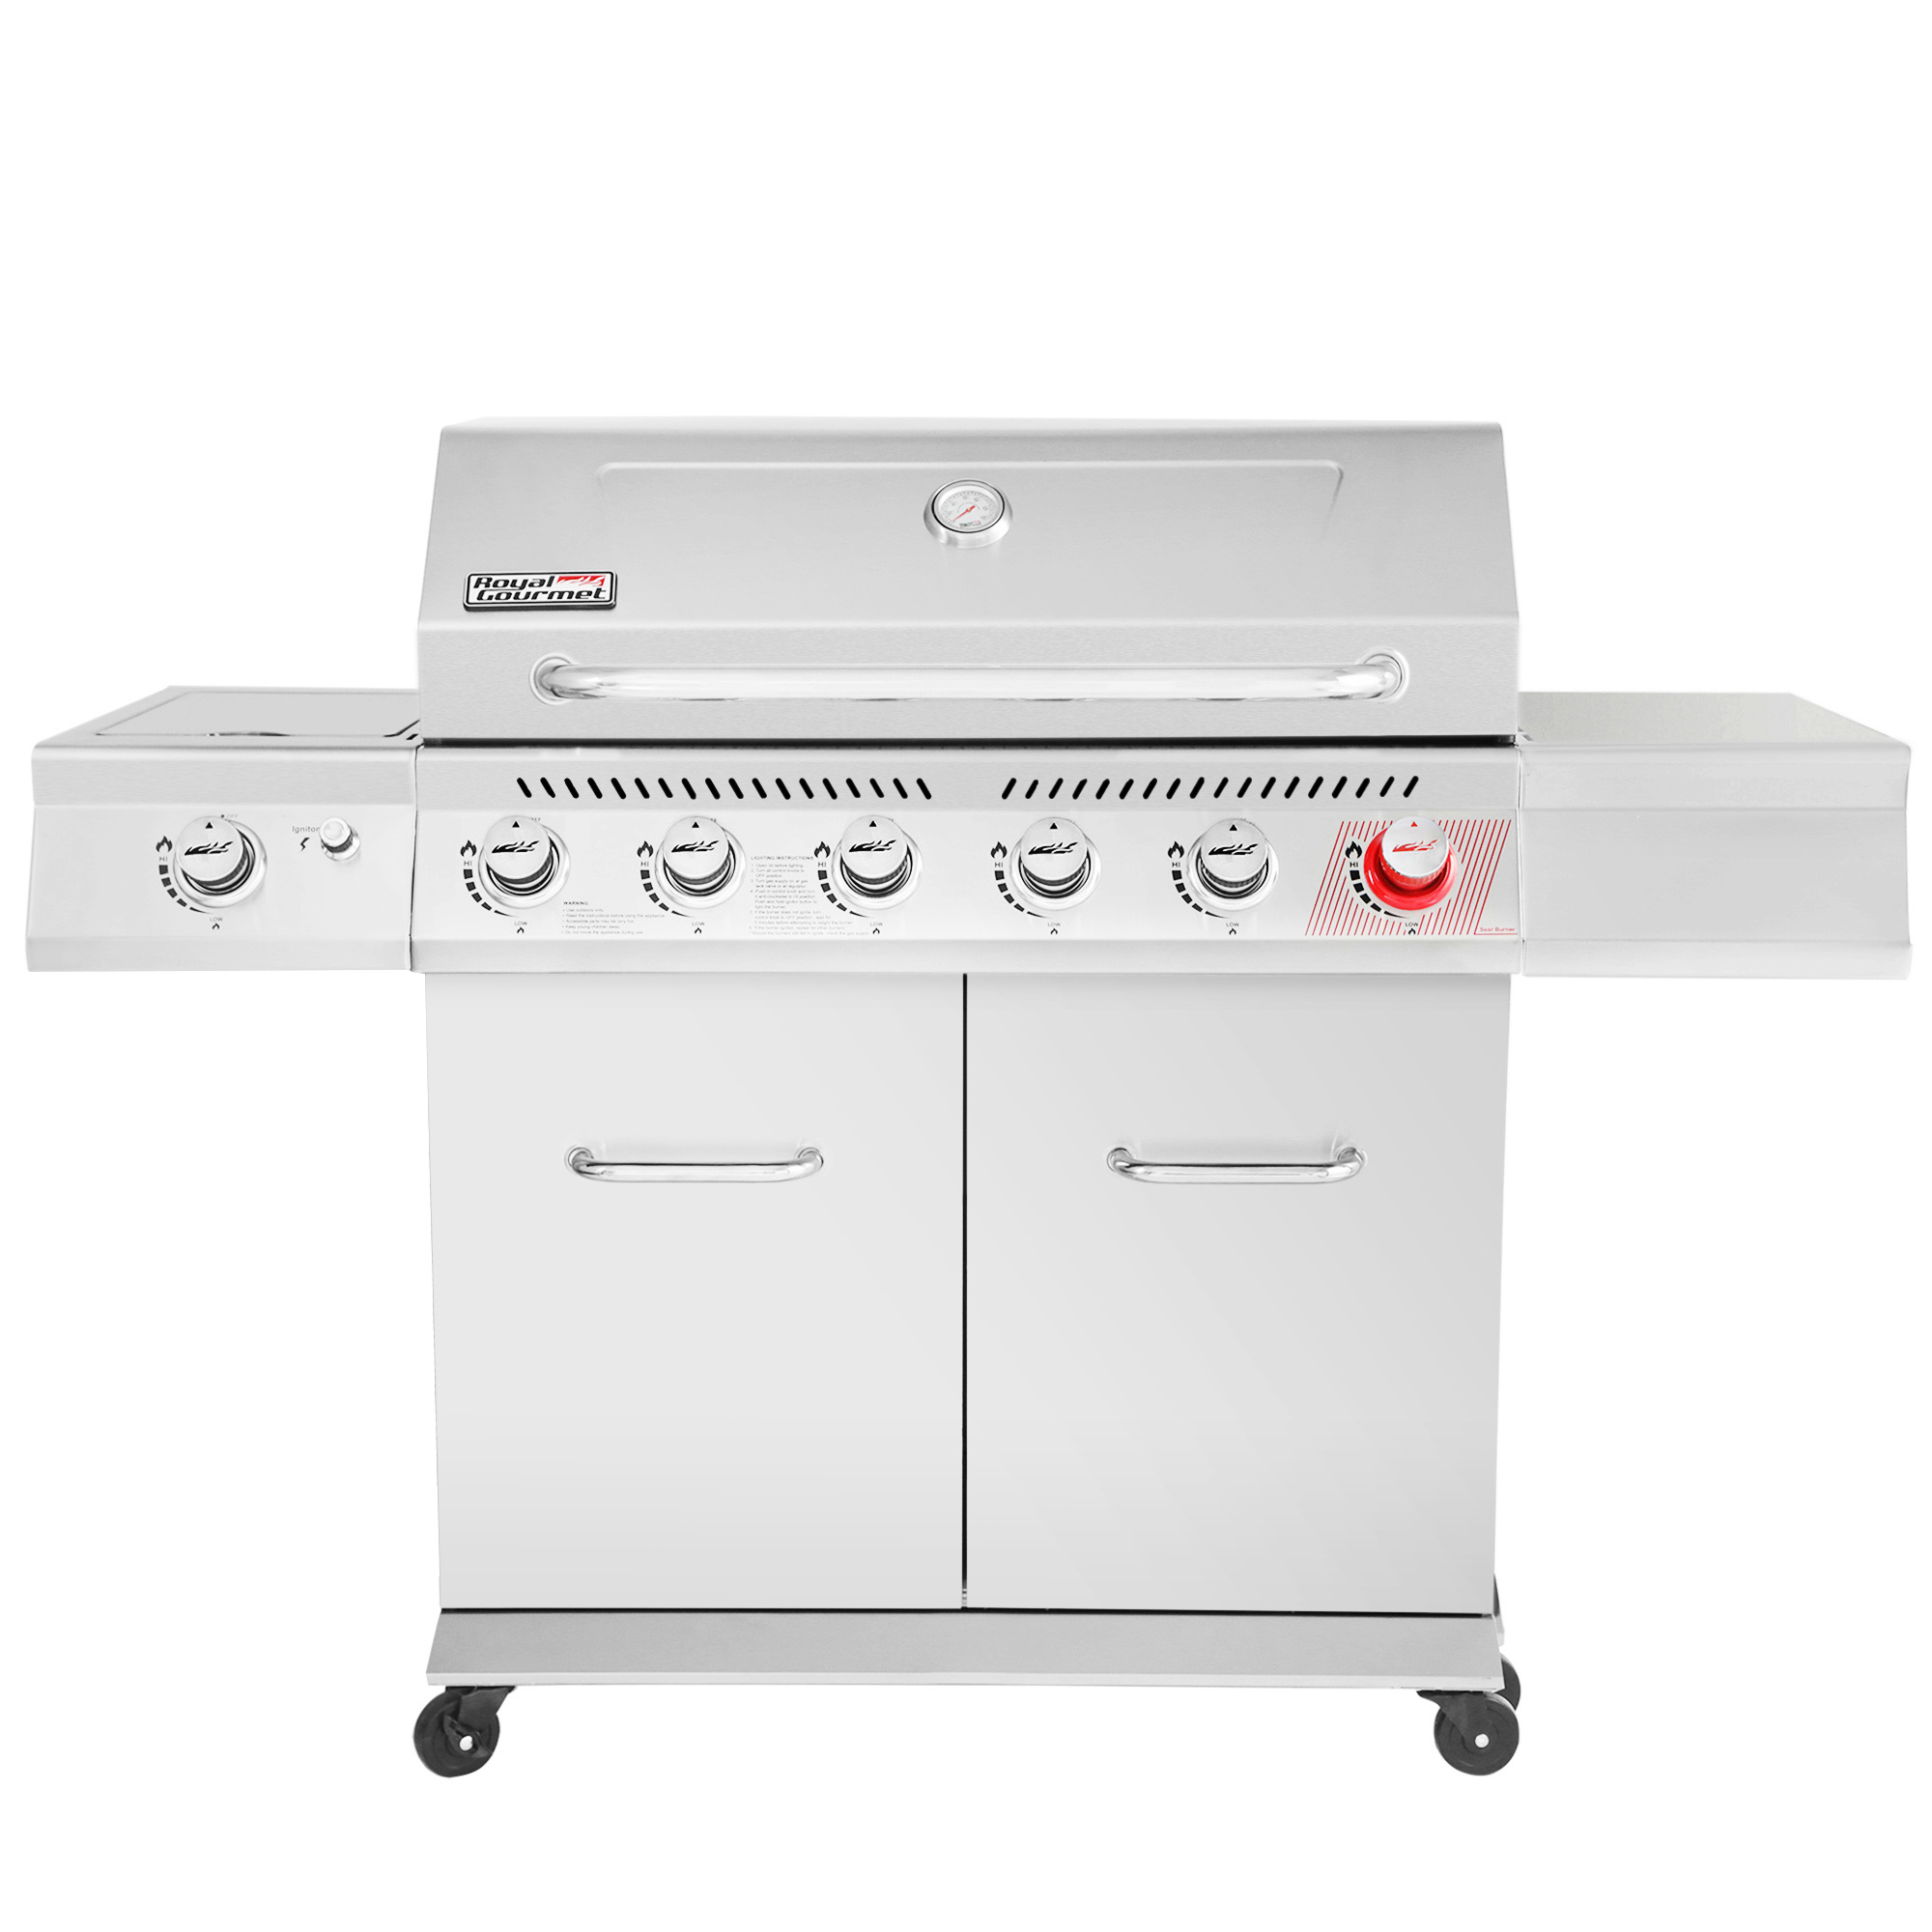 Royal Gourmet GA6402S Stainless Steel Gas Grill, Premier 6-Burner BBQ Grill with Sear Burner and Side Burner, 74,000 BTU, Cabinet Style, Outdoor Party Grill, Silver - image 1 of 9